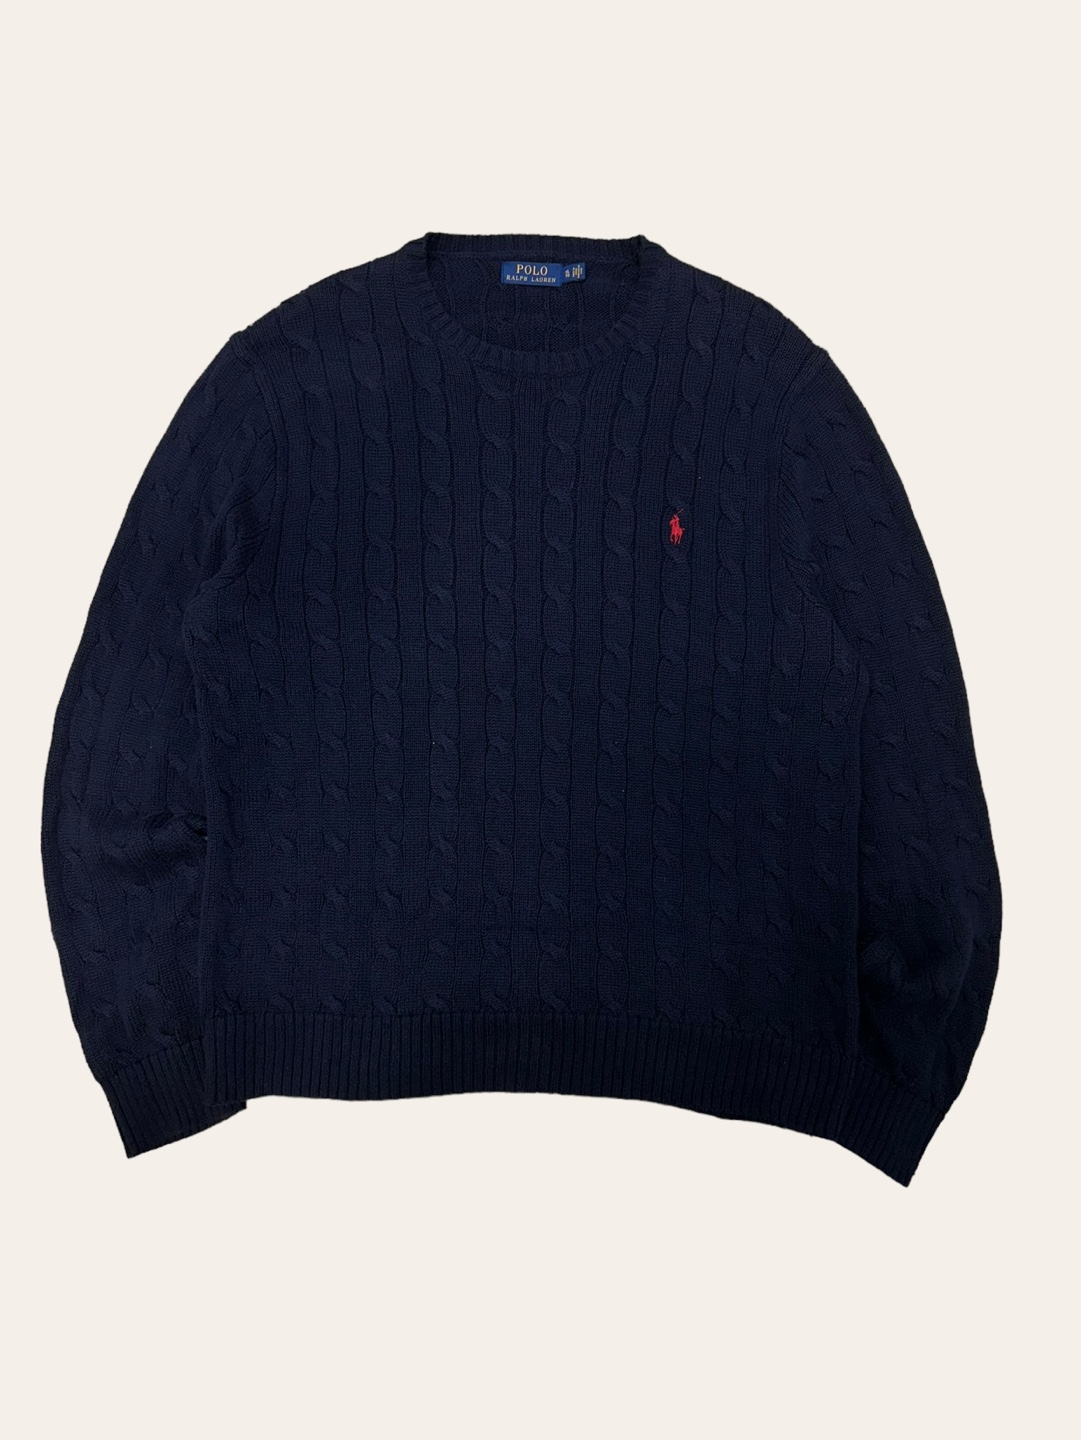 Polo ralph lauren navy cable cotton sweater XL